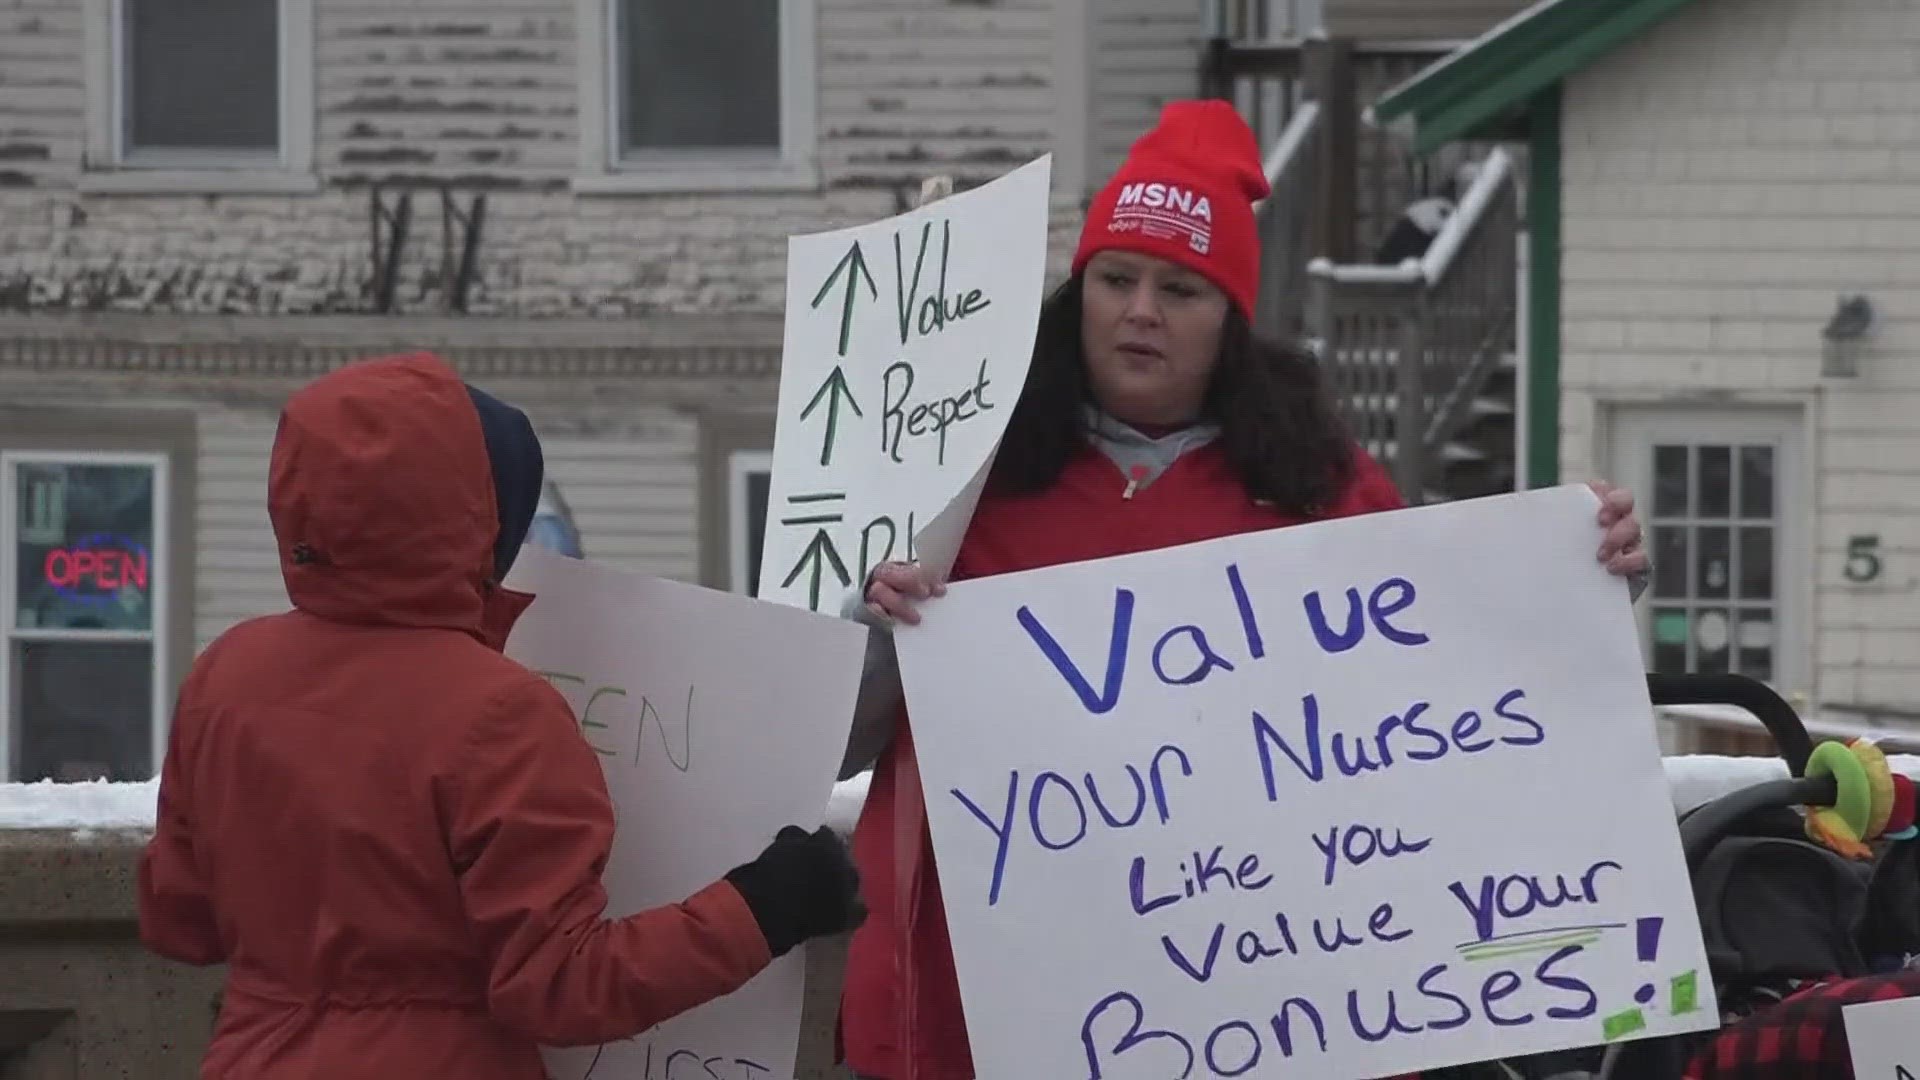 The union says travel nurses are hurting patient care. The hospital says they're needed.